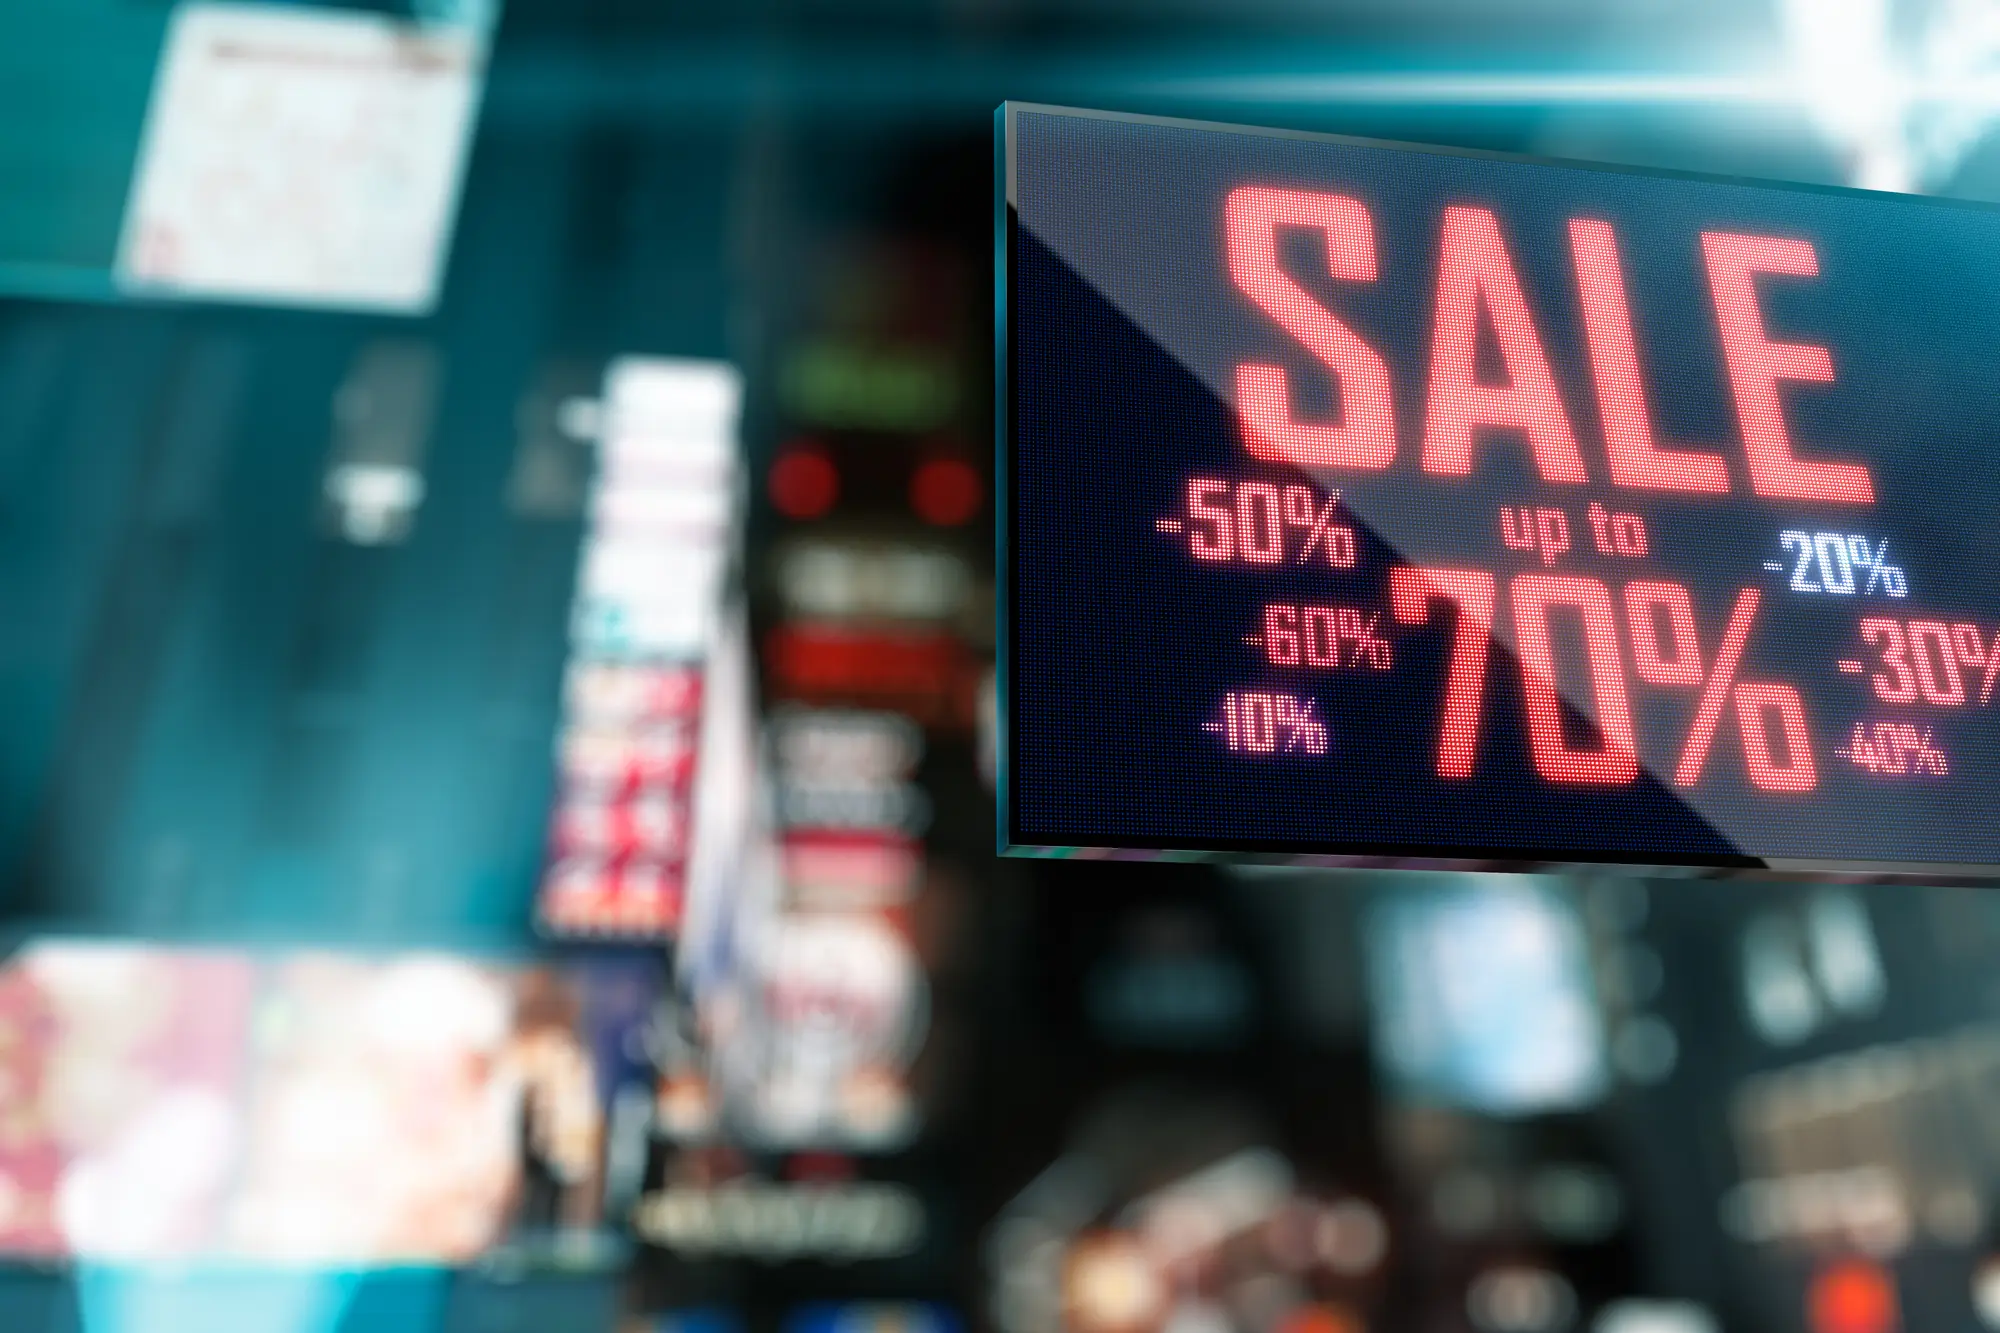 How Much Does Digital Signage Cost?